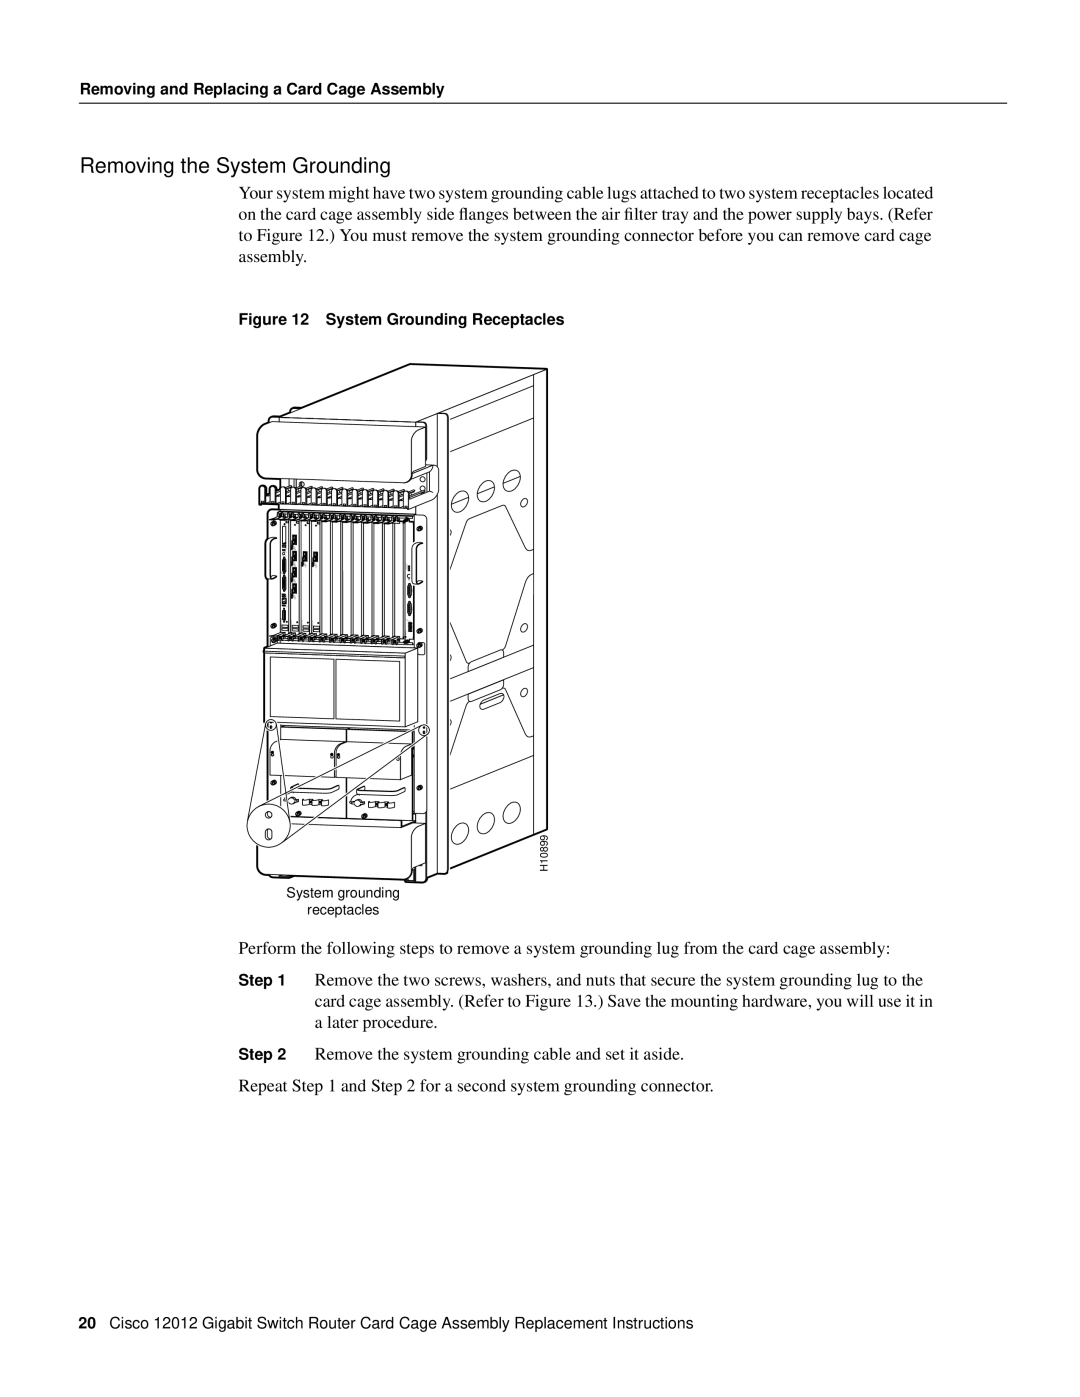 Cisco Systems 12012 manual Removing the System Grounding 